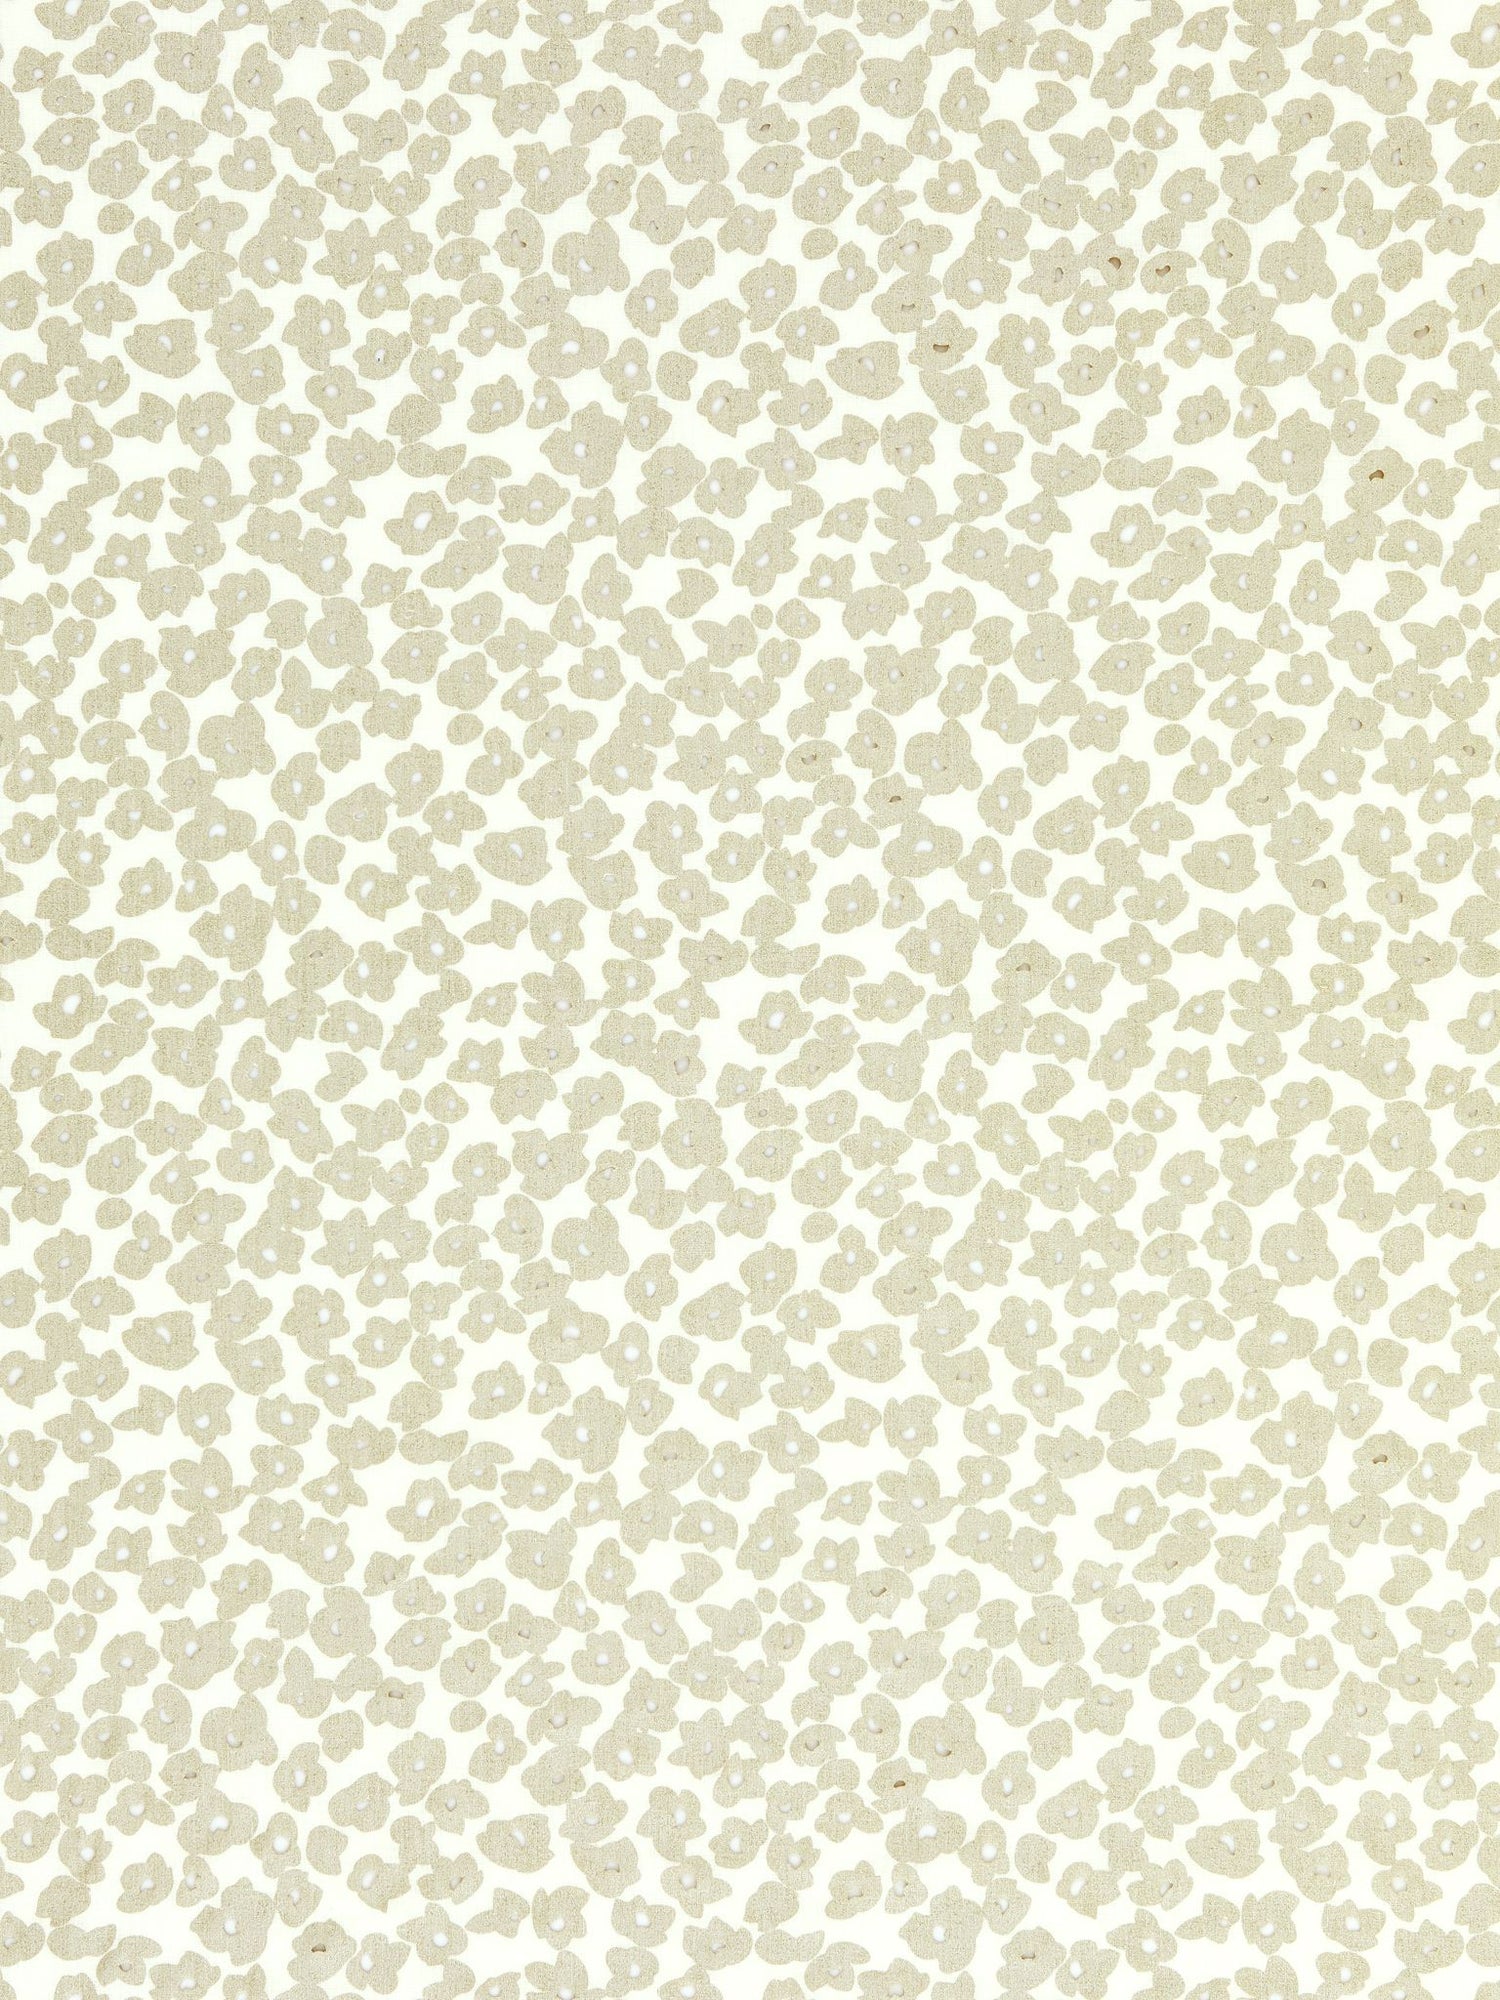 Oleana fabric in starlight color - pattern number GW 000116619 - by Scalamandre in the Grey Watkins collection